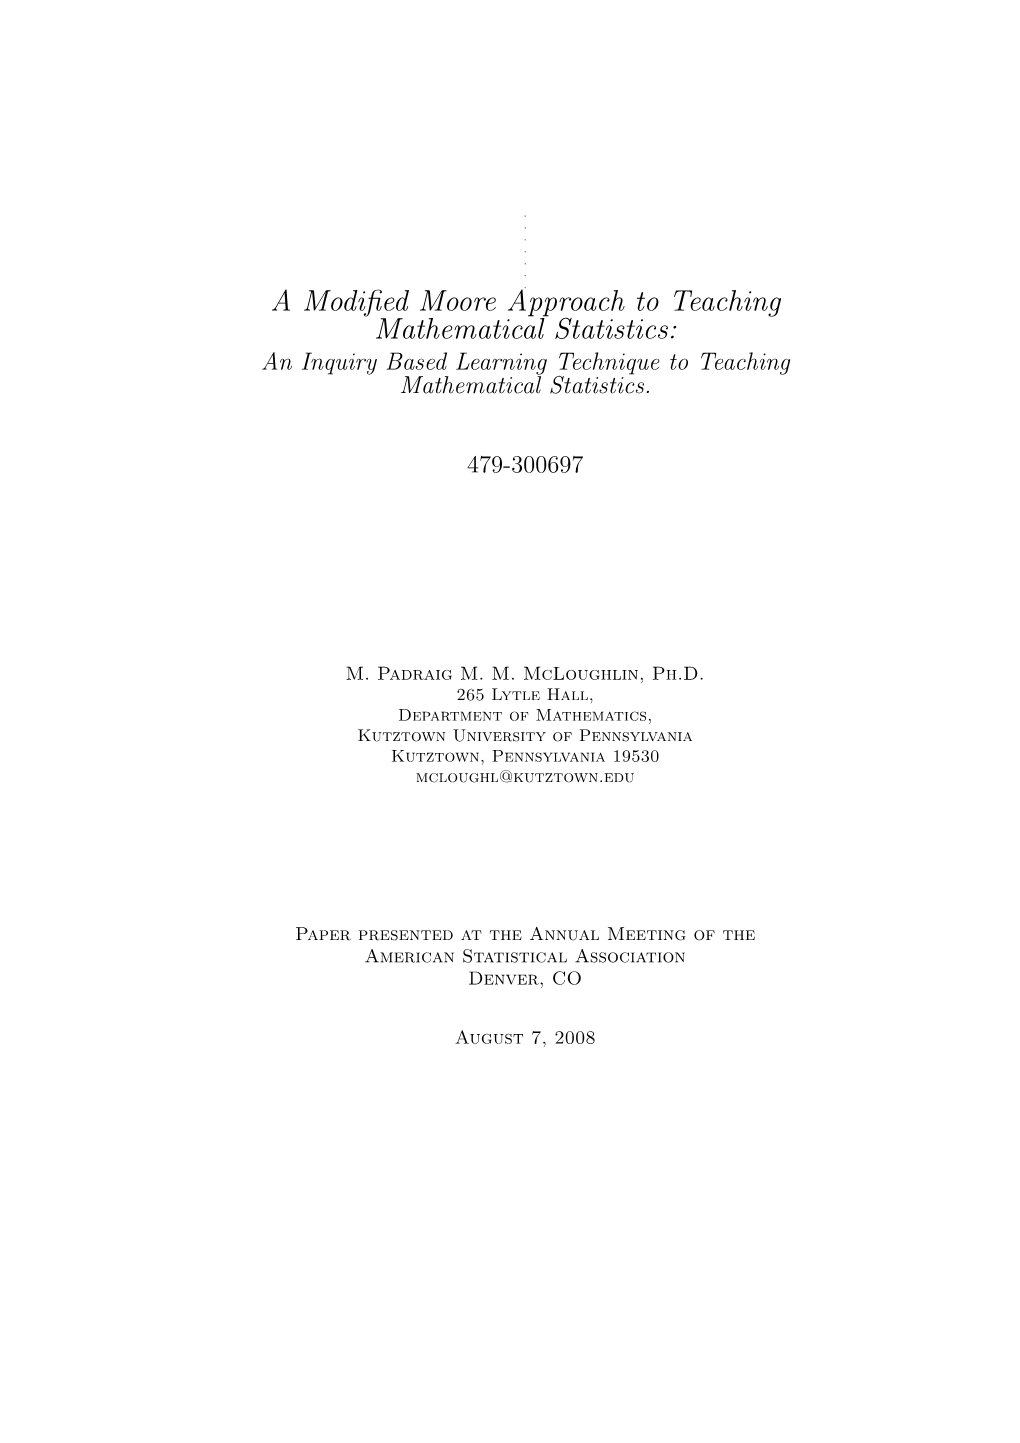 A Modified Moore Approach to Teaching Mathematical Statistics: an Inquiry Based Learning Technique to Teaching Mathematical Statistics